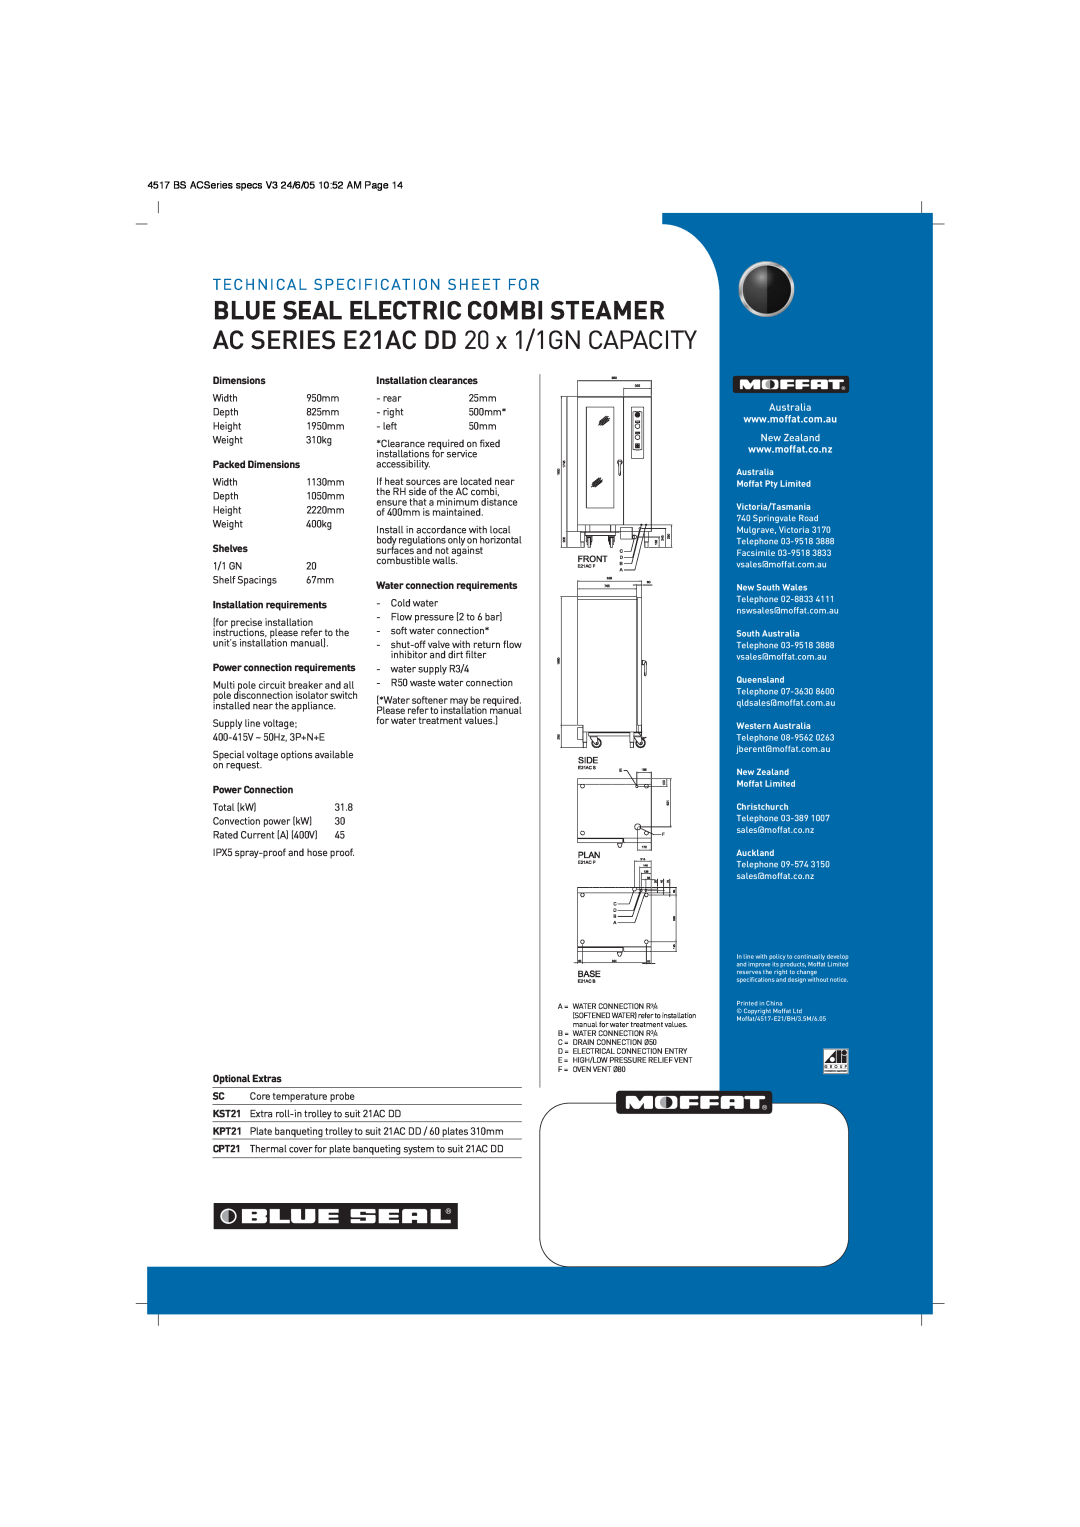 Moffat Blue Seal Electric Combi Steamer, AC SERIES E21AC DD 20 x 1/1GN CAPACITY, Technical Specification Sheet For 